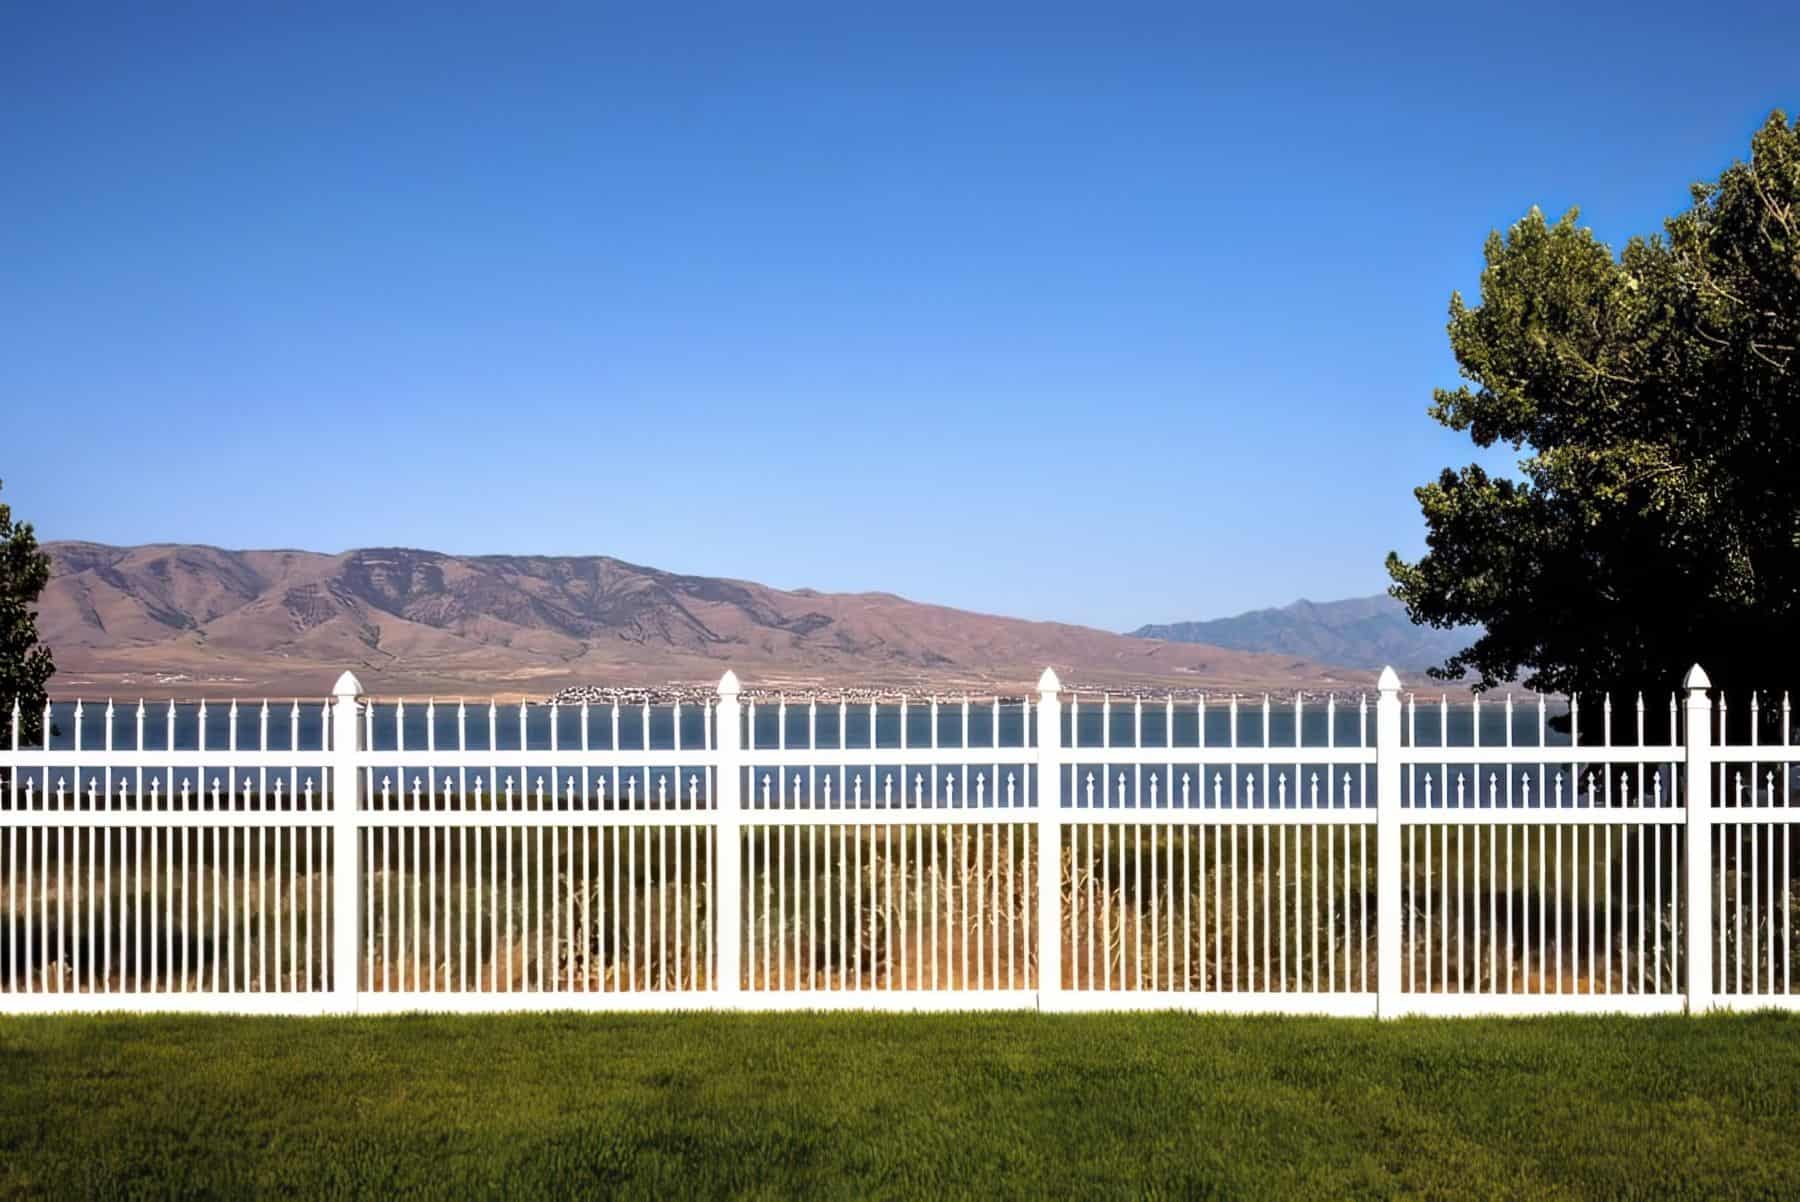 Majestic vinyl picket fence framing serene lake & majestic mountains, defining a picturesque green boundary.